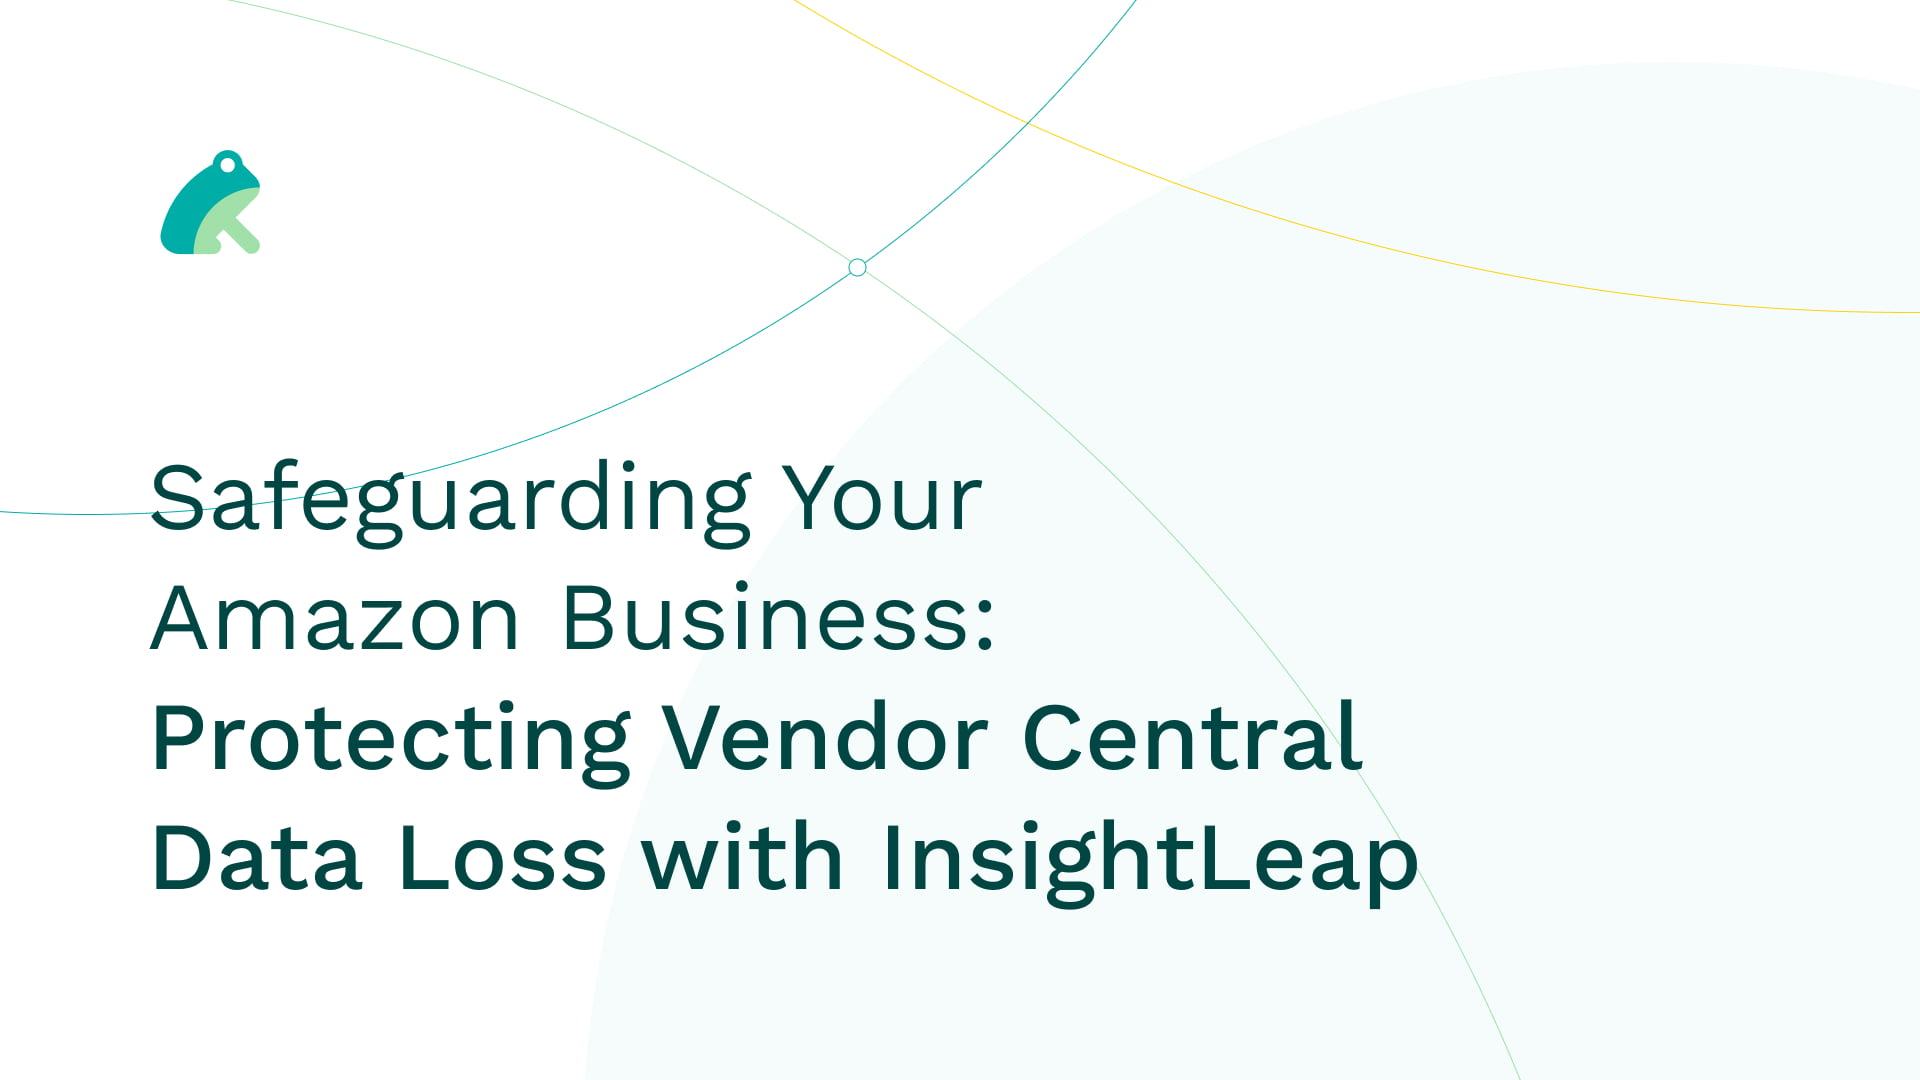 Safeguarding Your Amazon Business: Protecting Vendor Central Data Loss with InsightLeap